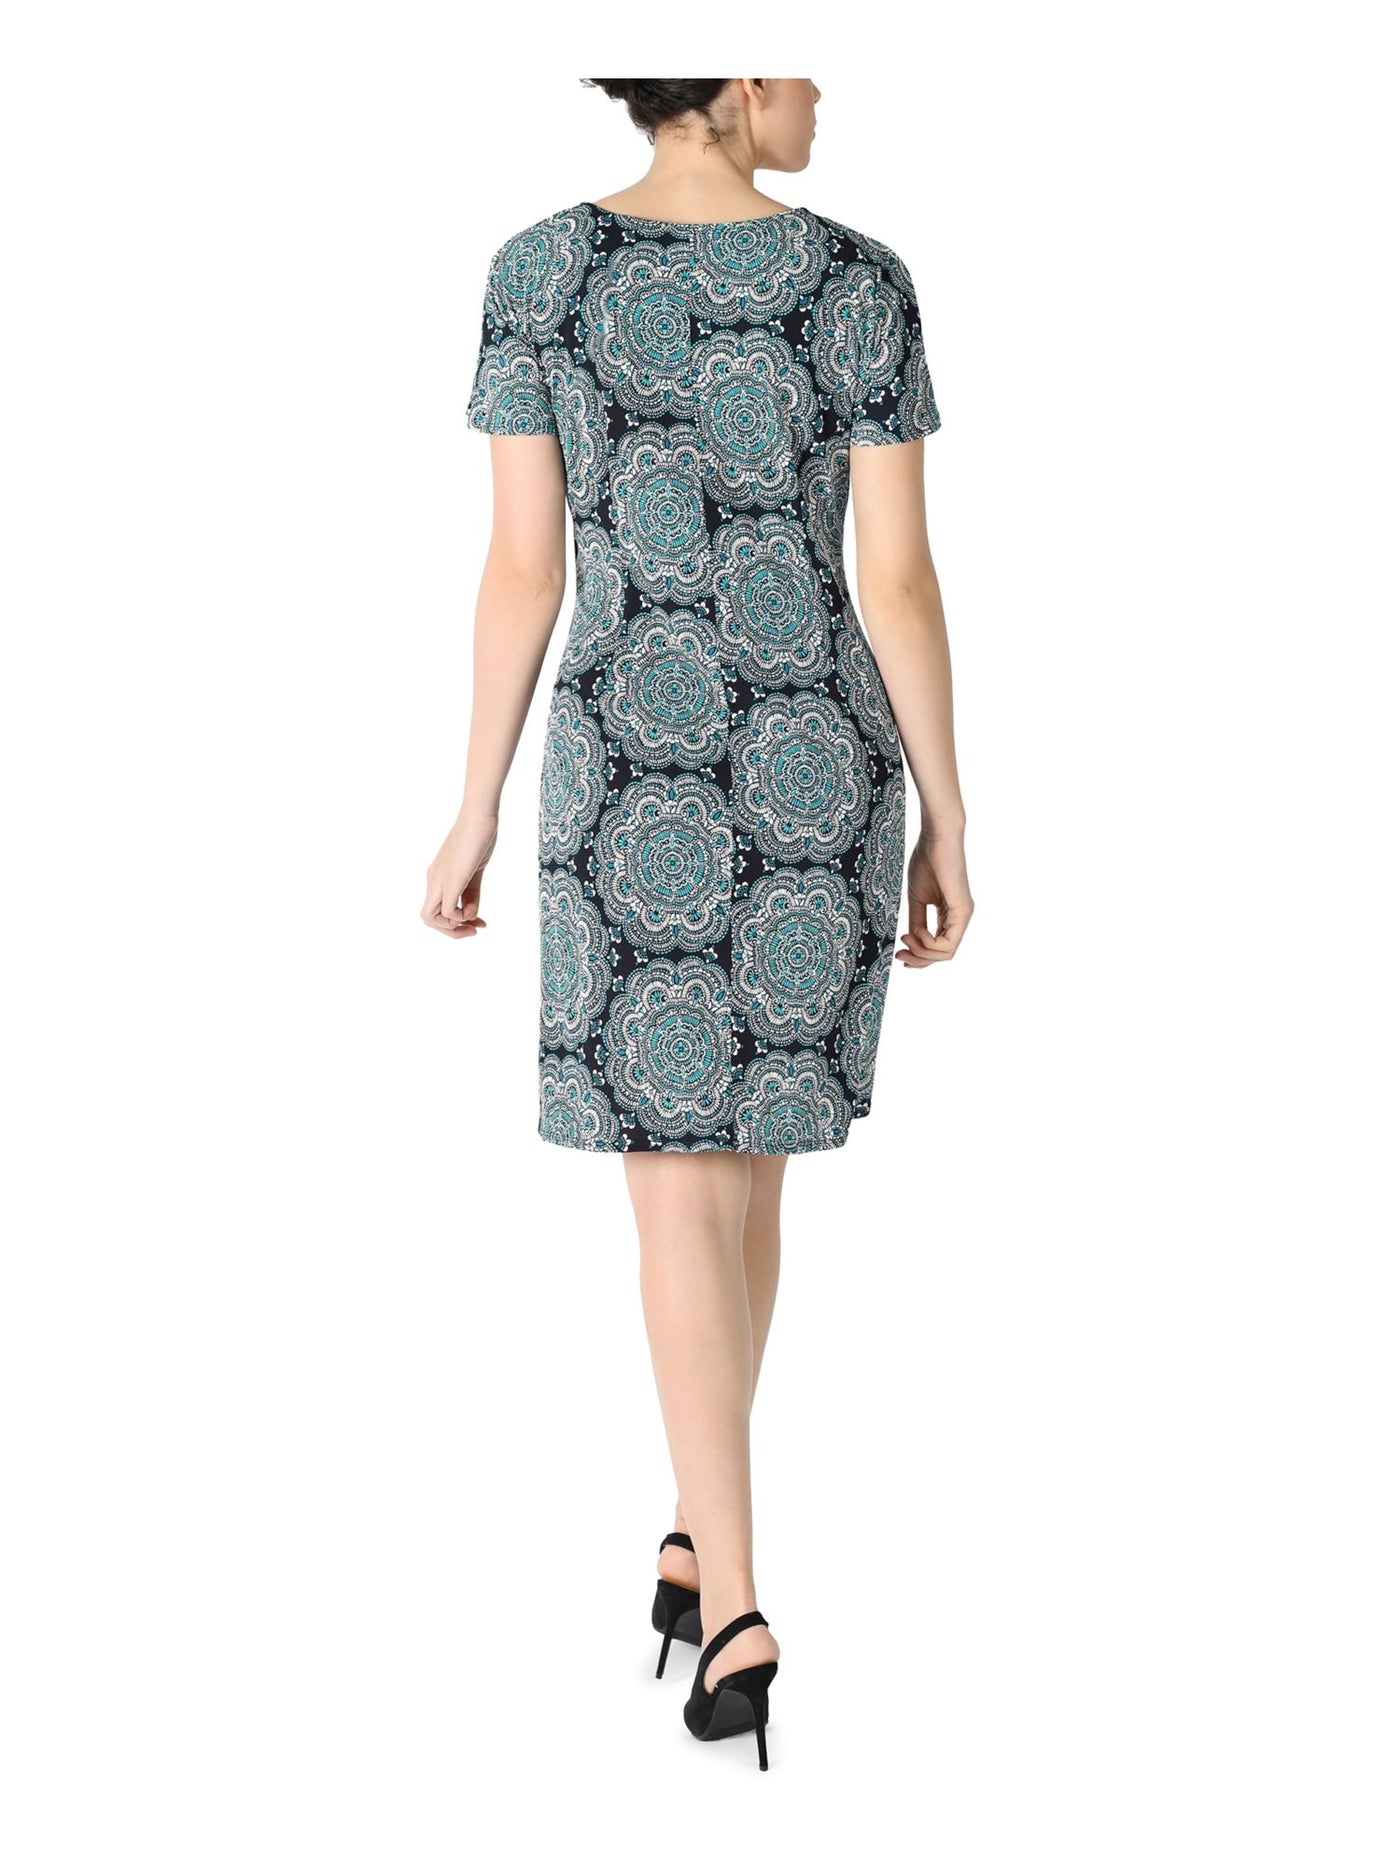 SIGNATURE BY ROBBIE BEE Womens Navy Stretch Tie Faux Wrap Skirt Printed Short Sleeve Crew Neck Above The Knee Wear To Work Sheath Dress Petites PS